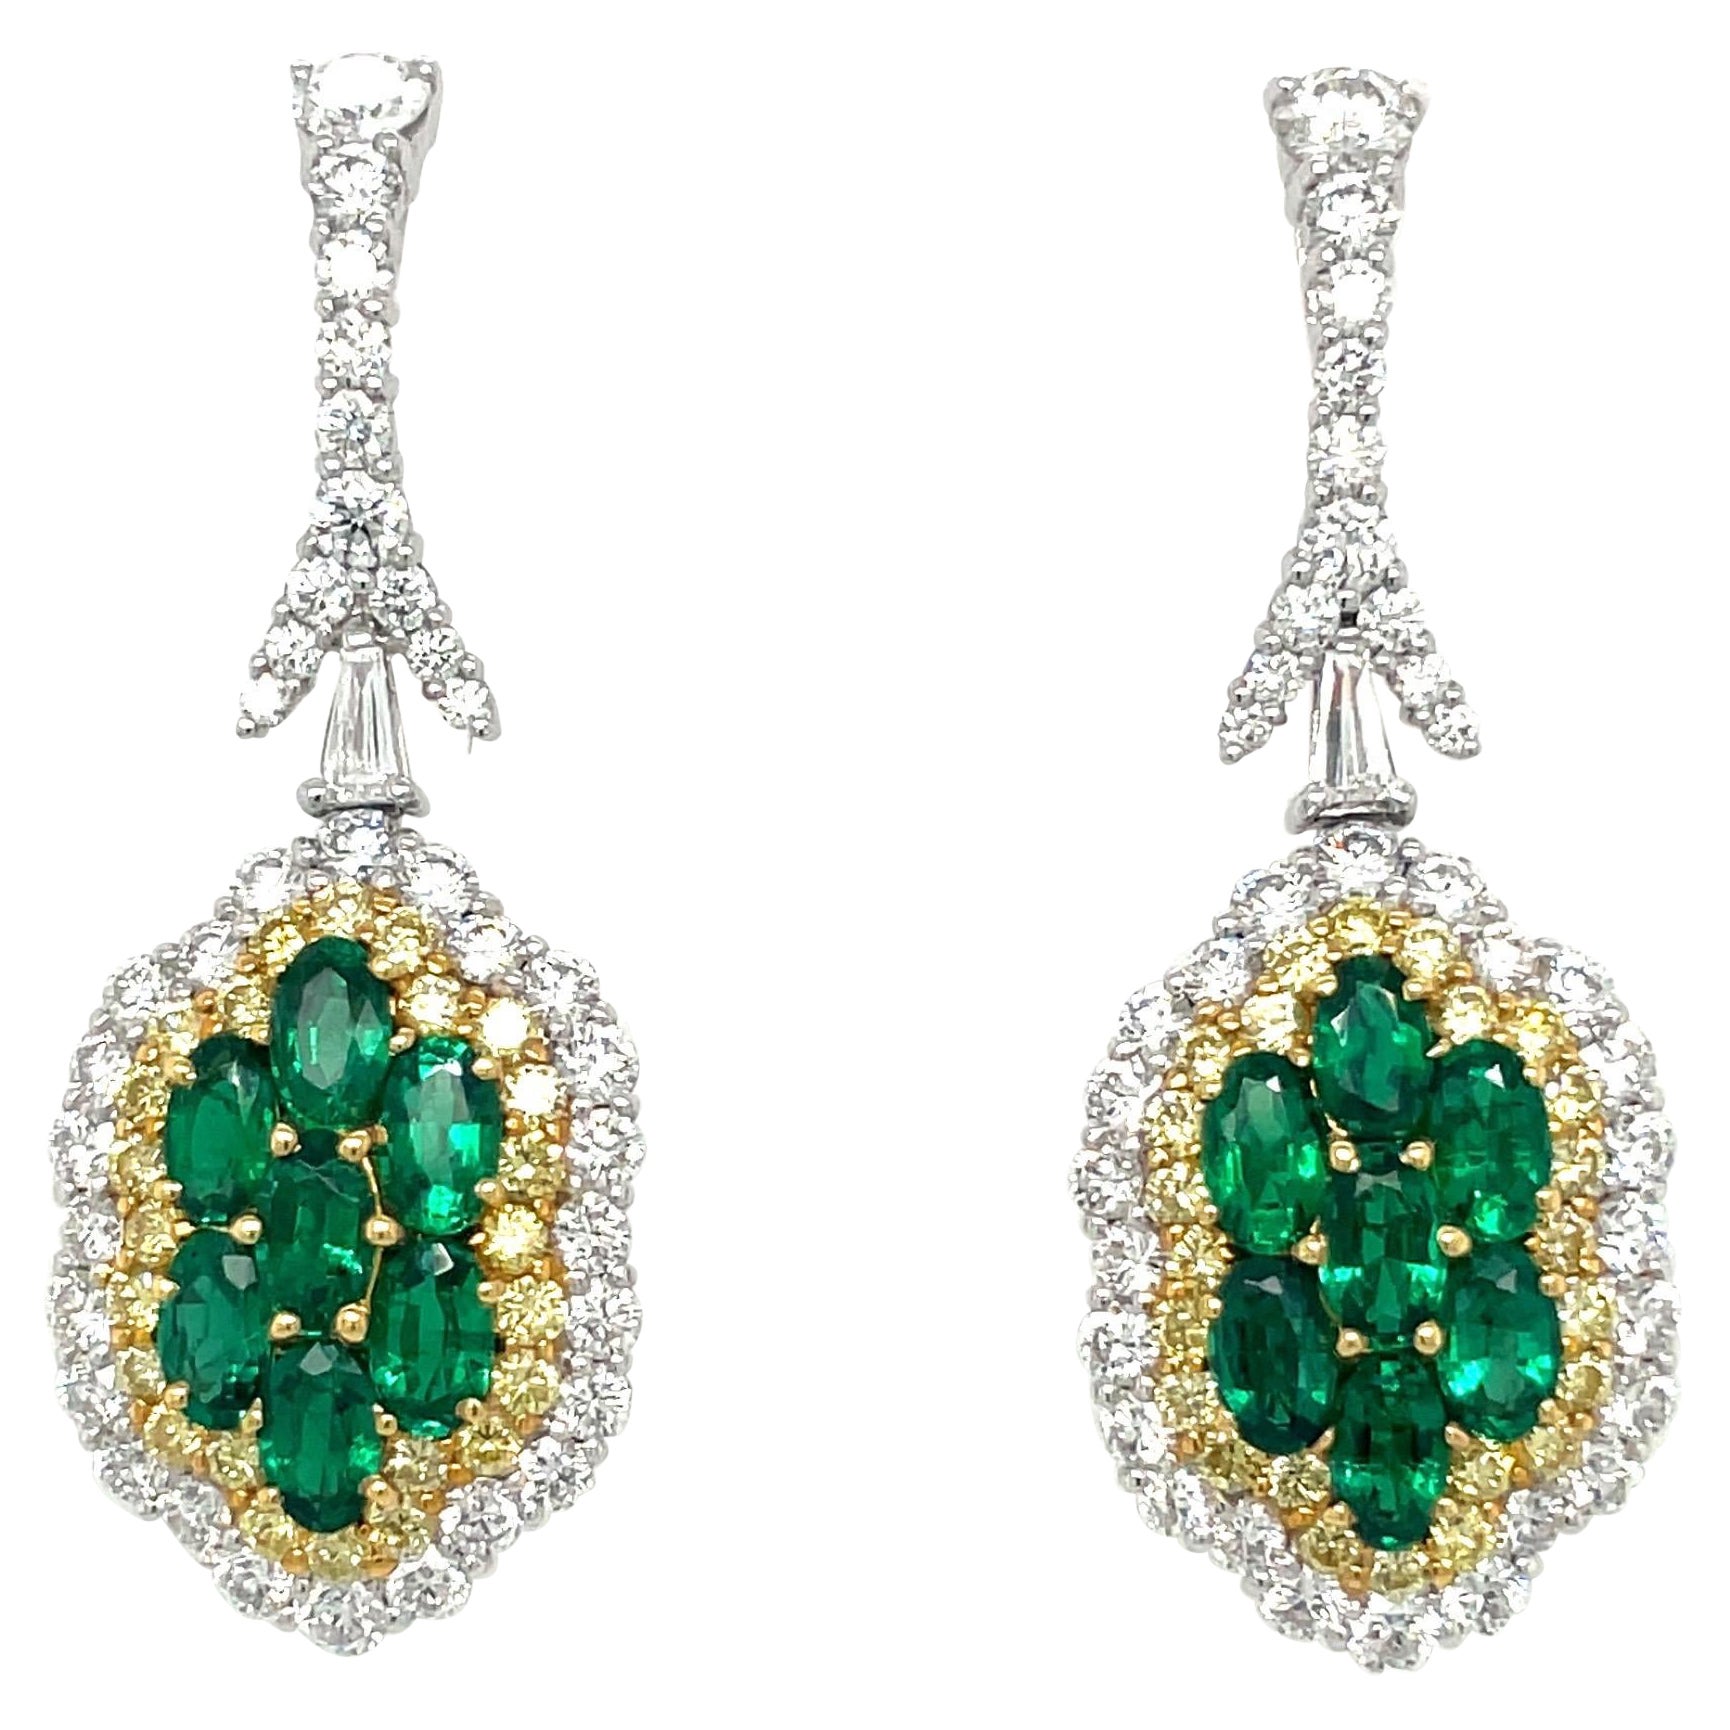 Plat/18KT YG 3.00Ct Emerald Earrings with 2.66Ct Diamonds 1.07Ct Yellow Diamonds For Sale